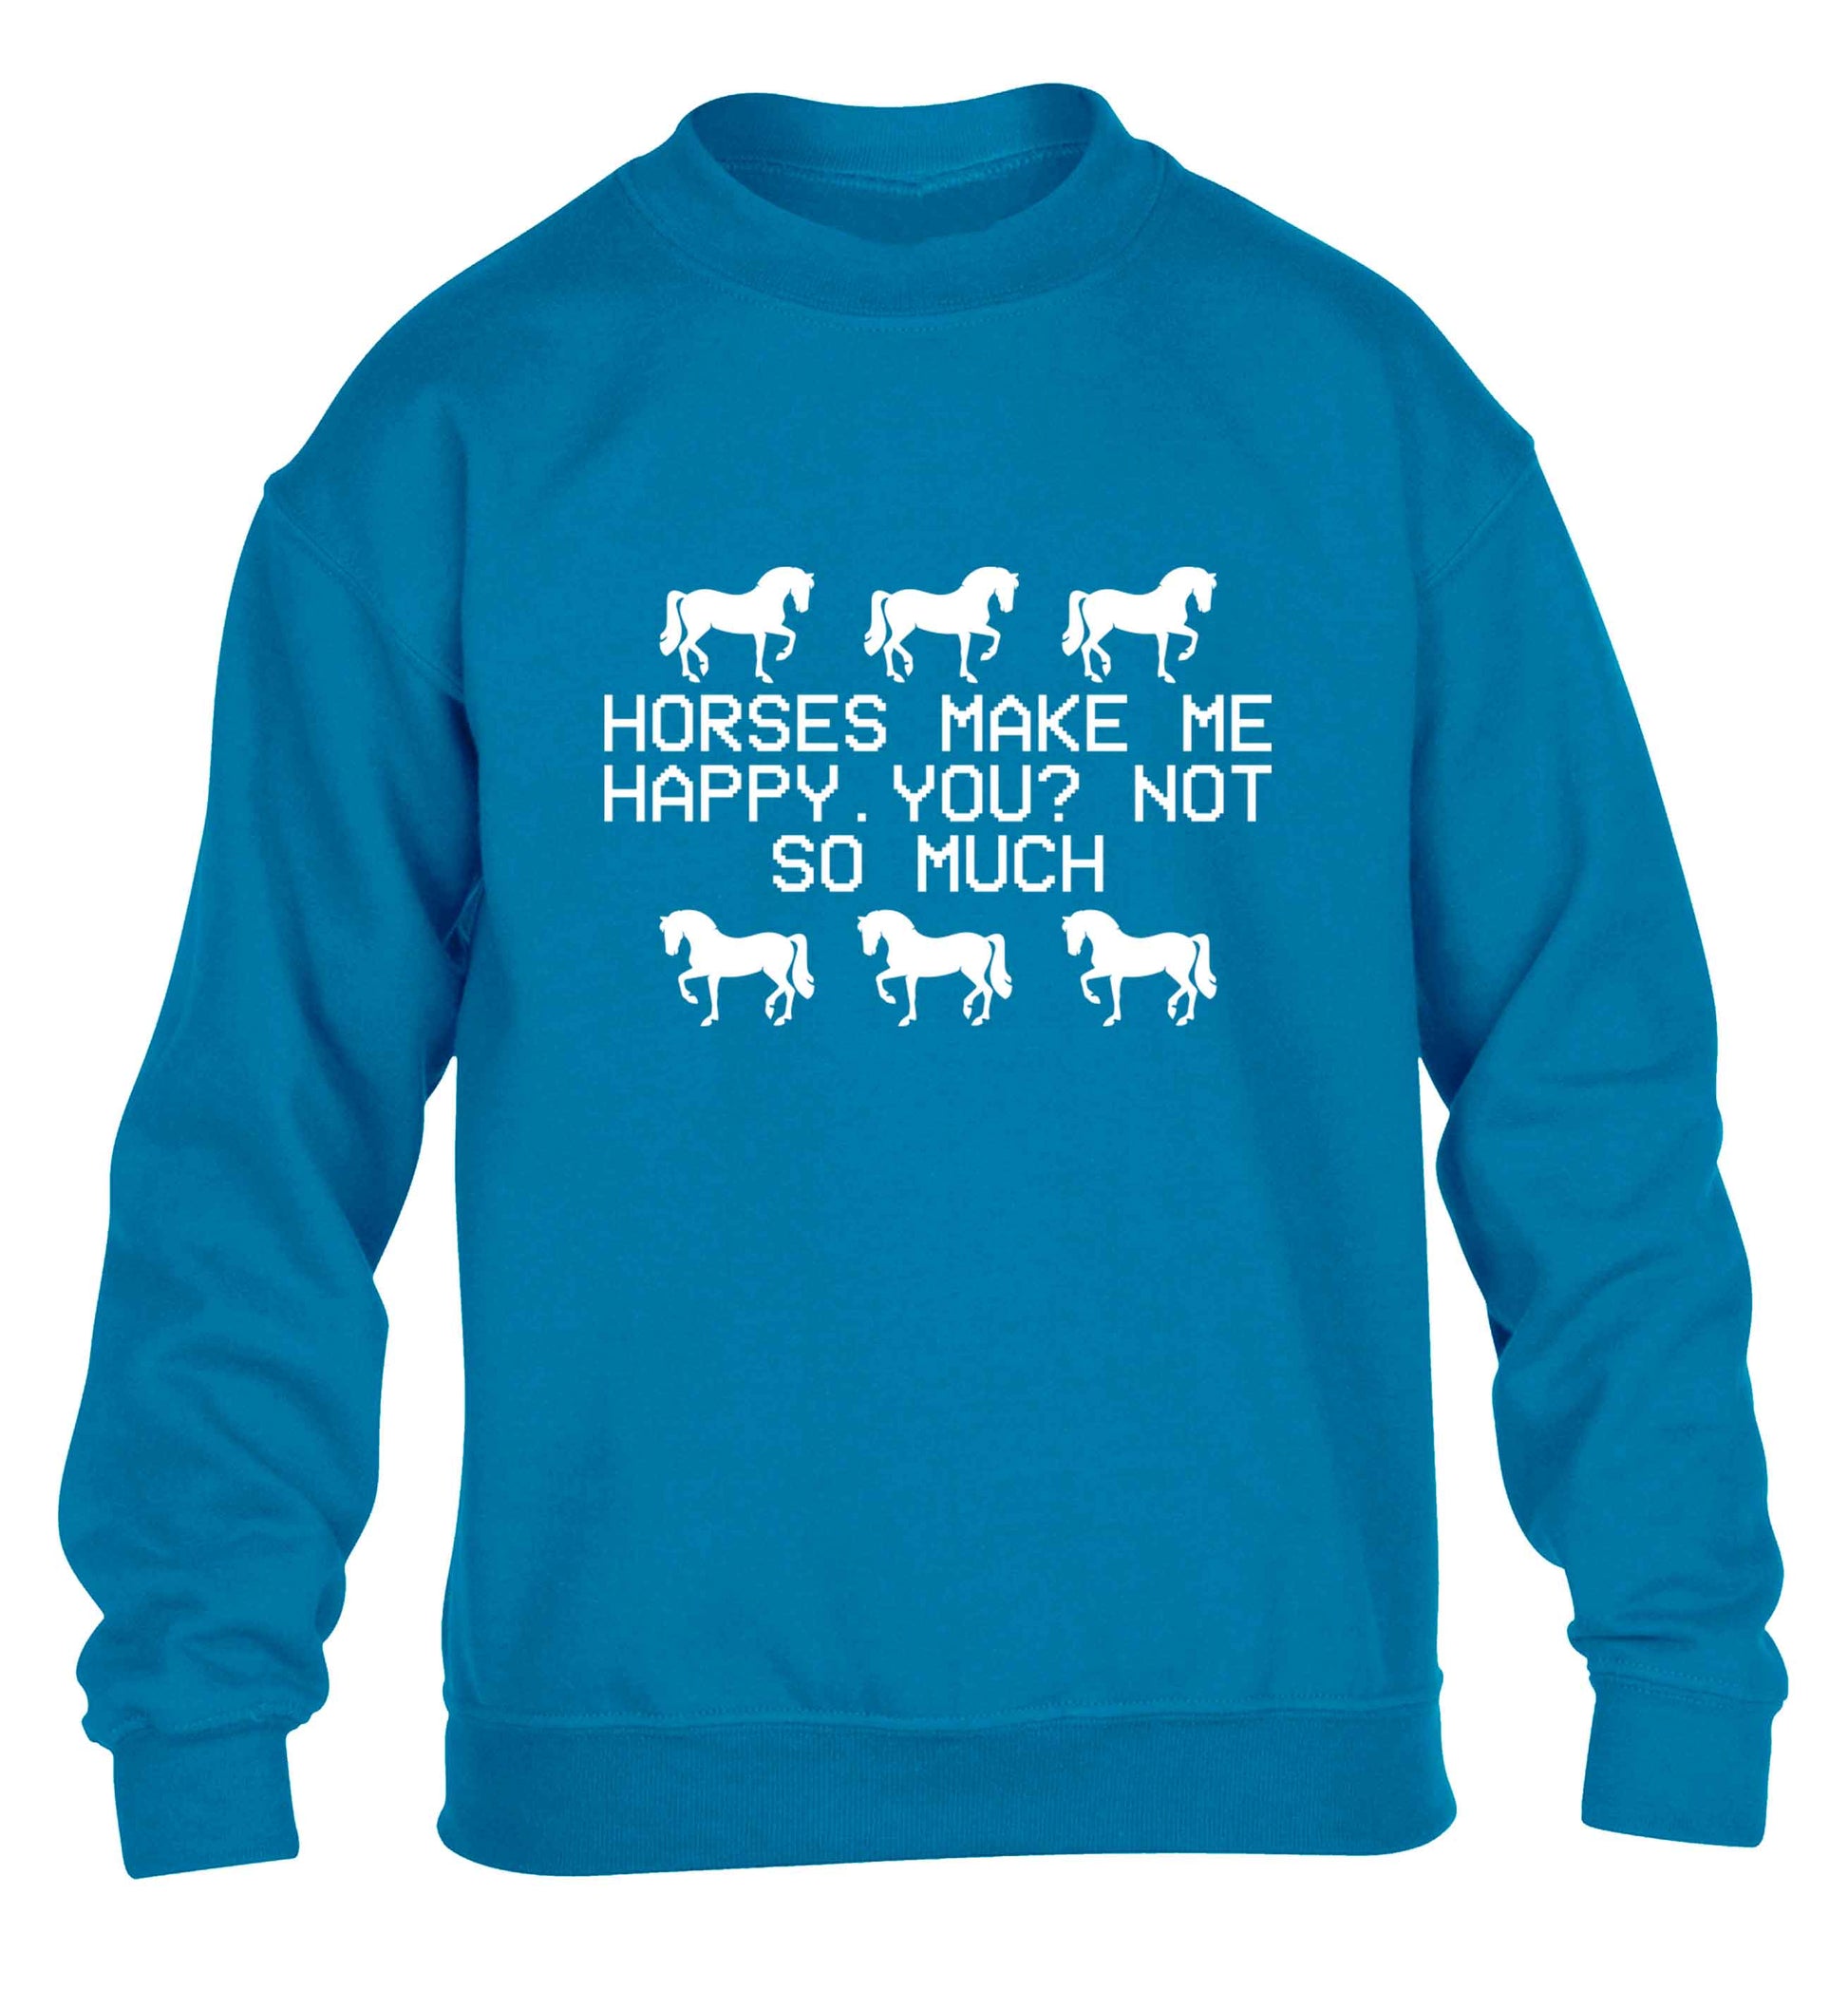 Horses make me happy, you not so much children's blue sweater 12-13 Years